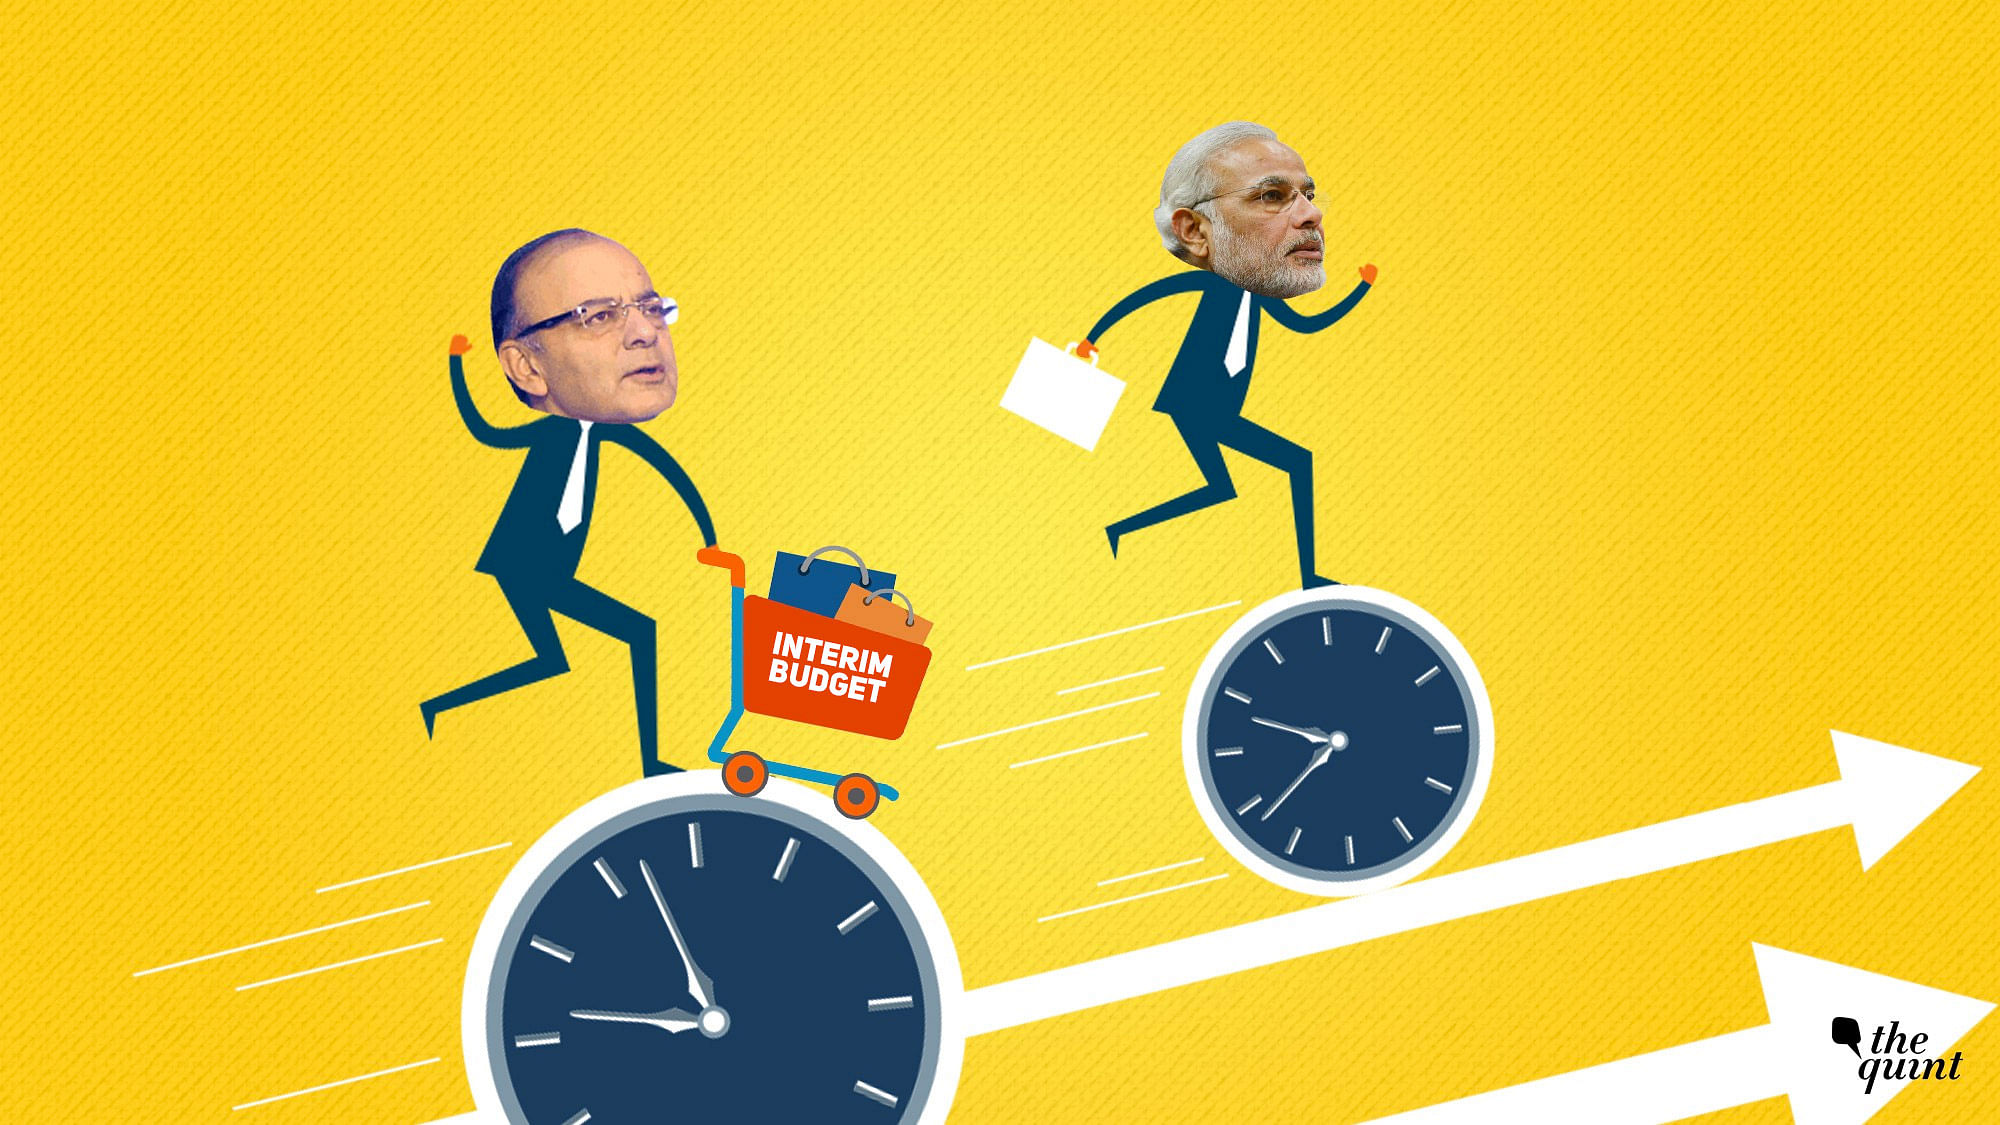 The Quint breaks down the scope of the interim budget, and what is likely to be on the Modi government’s agenda.